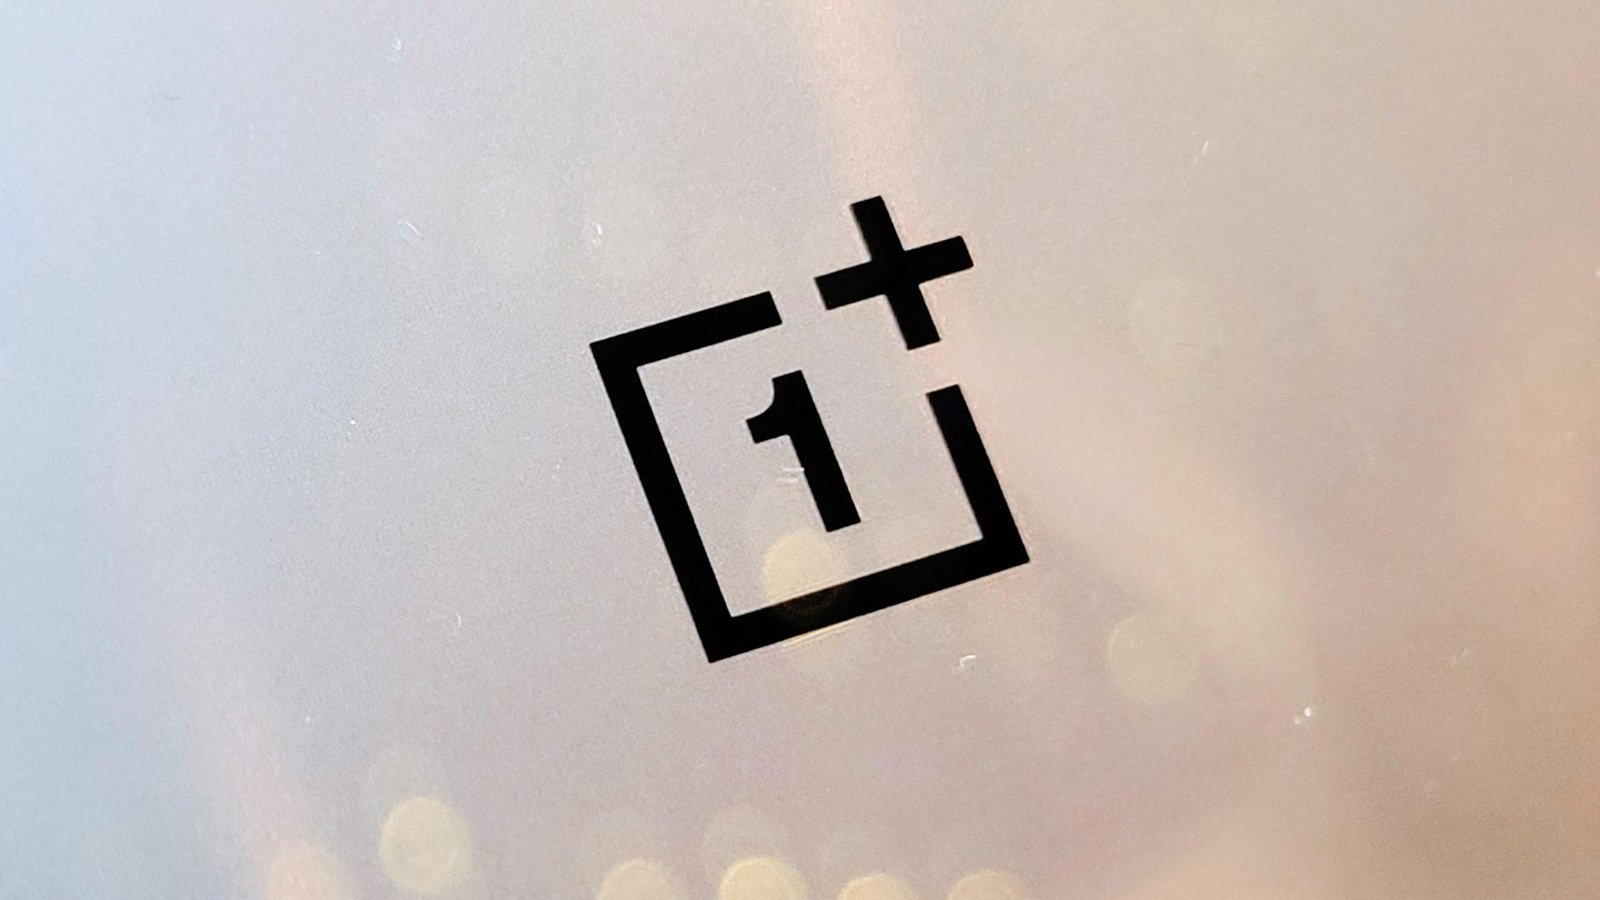 OnePlus might not stop at a 6,100mAh battery